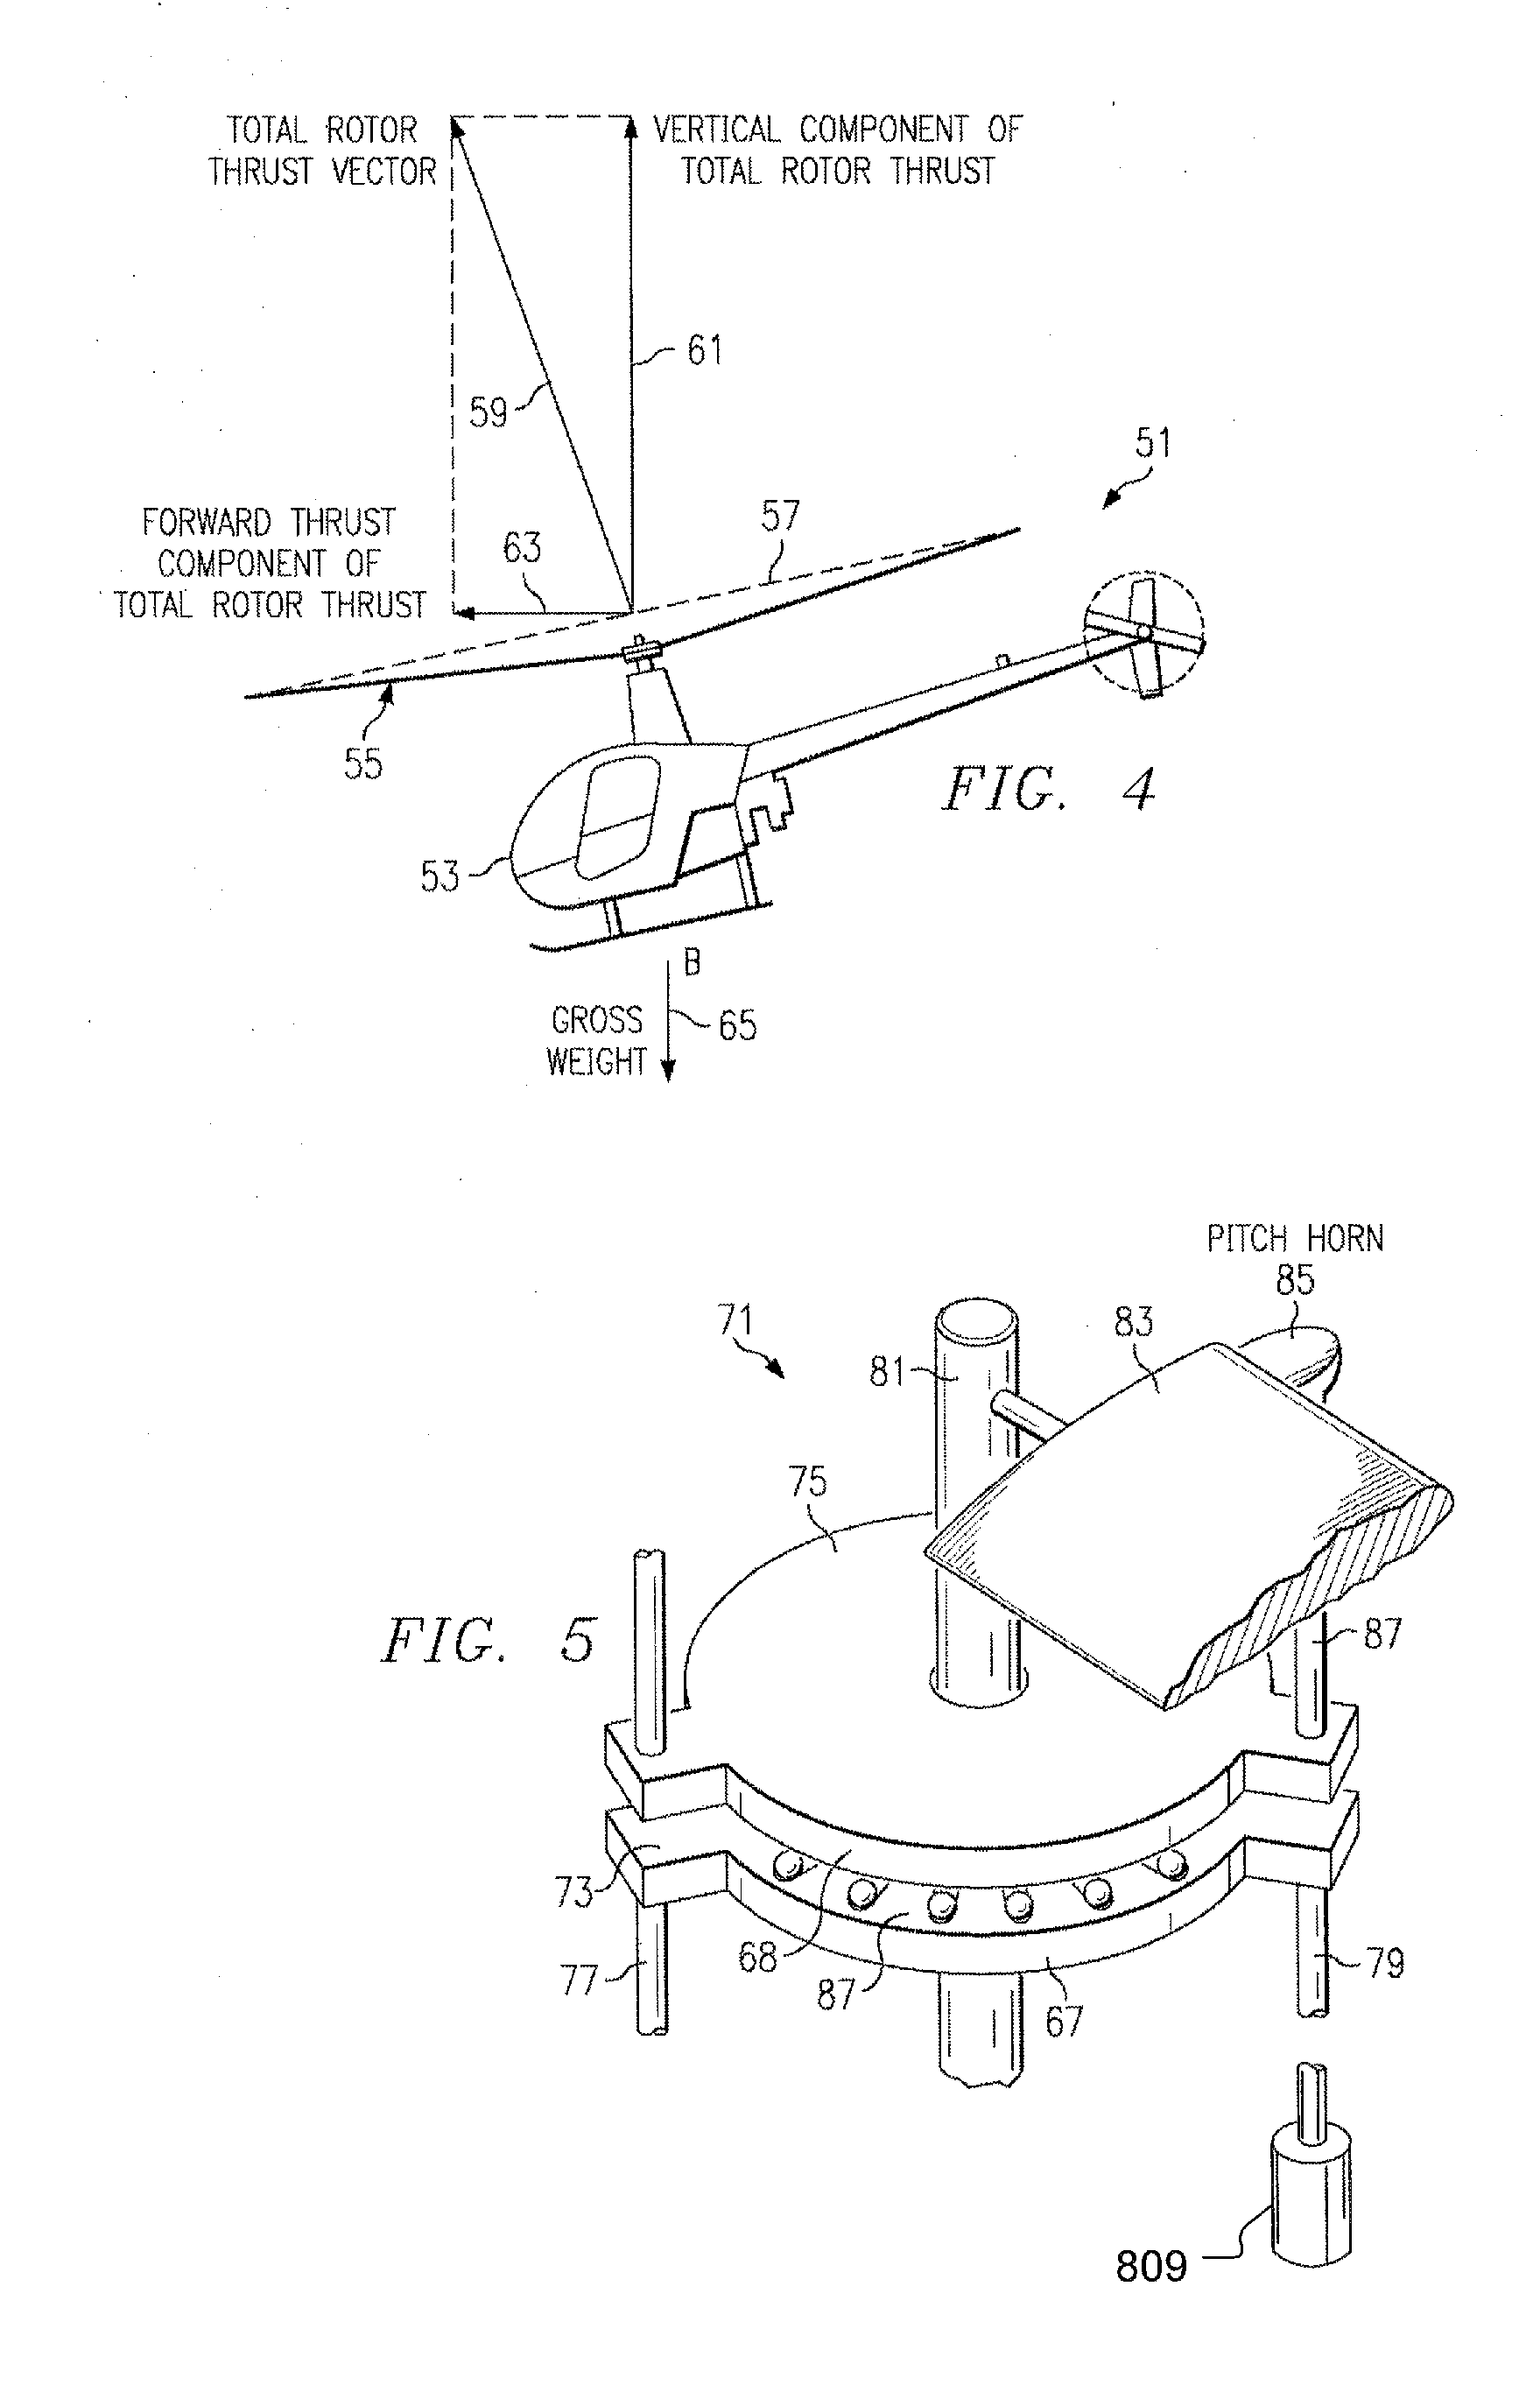 Active Prop Rotor Stability System